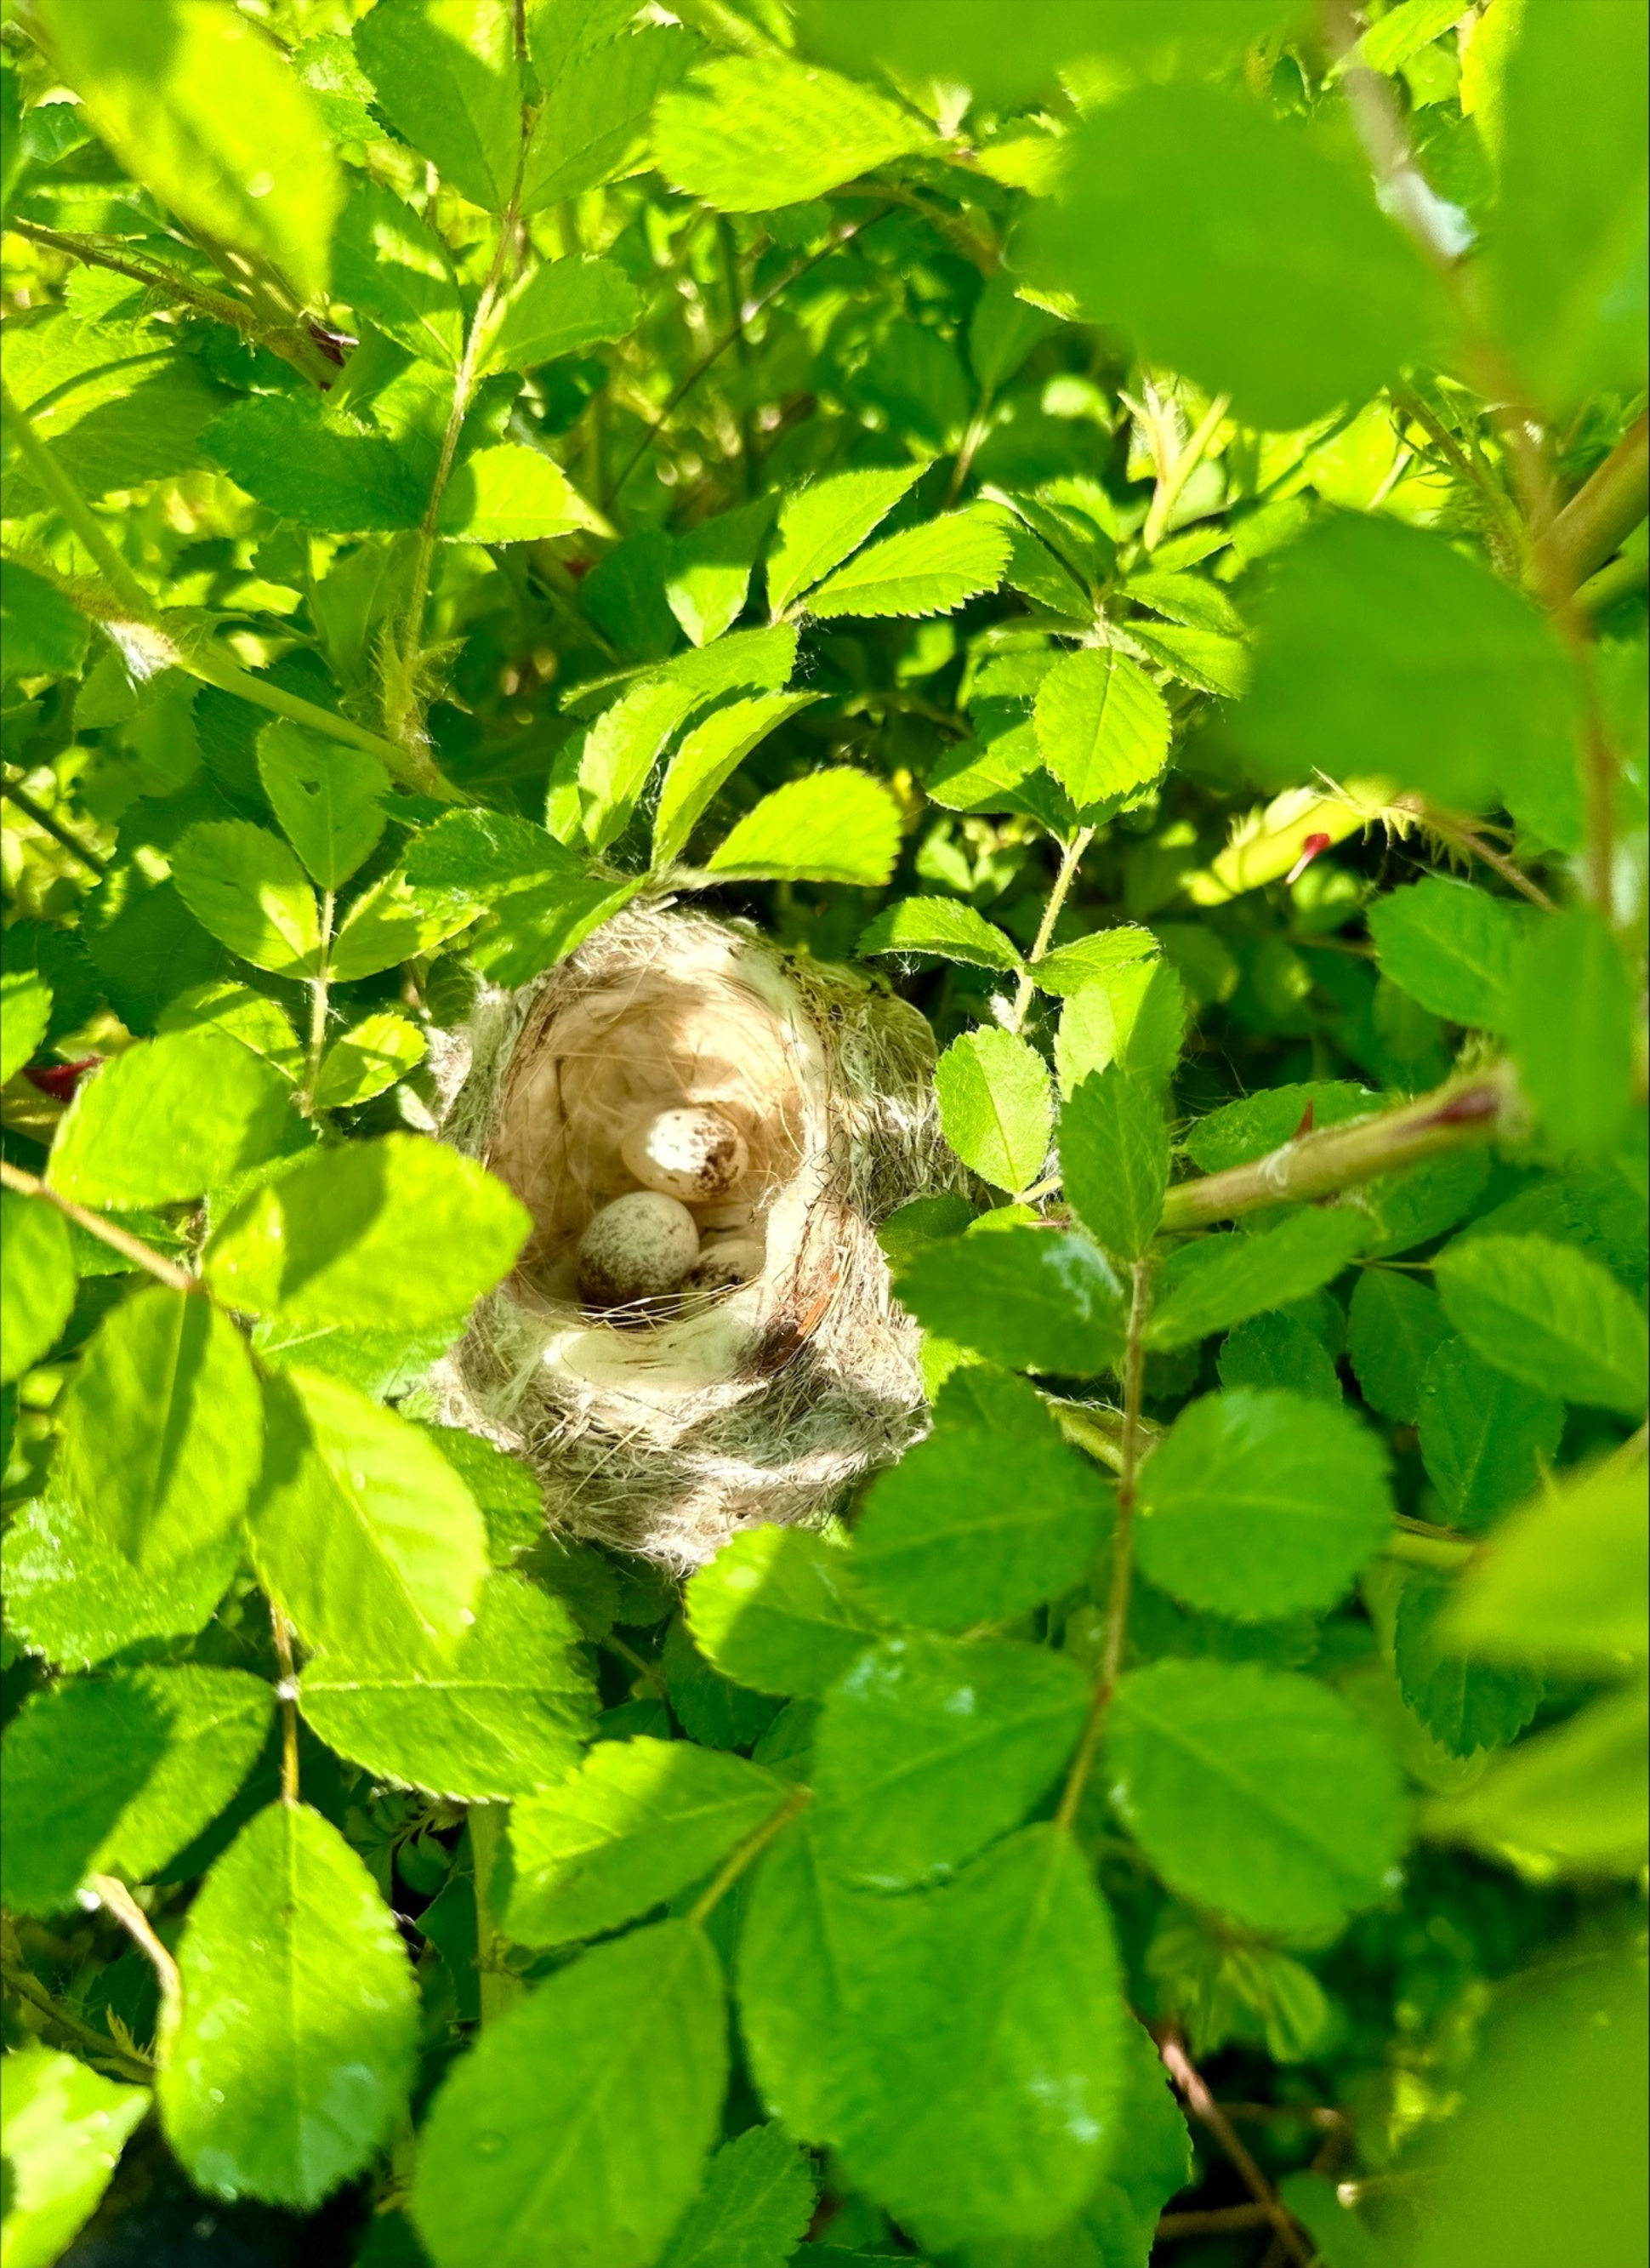 A small, cup-shaped bird's nest composed of woven grass and nestled in a plant. It contains three white eggs with brown speckles.